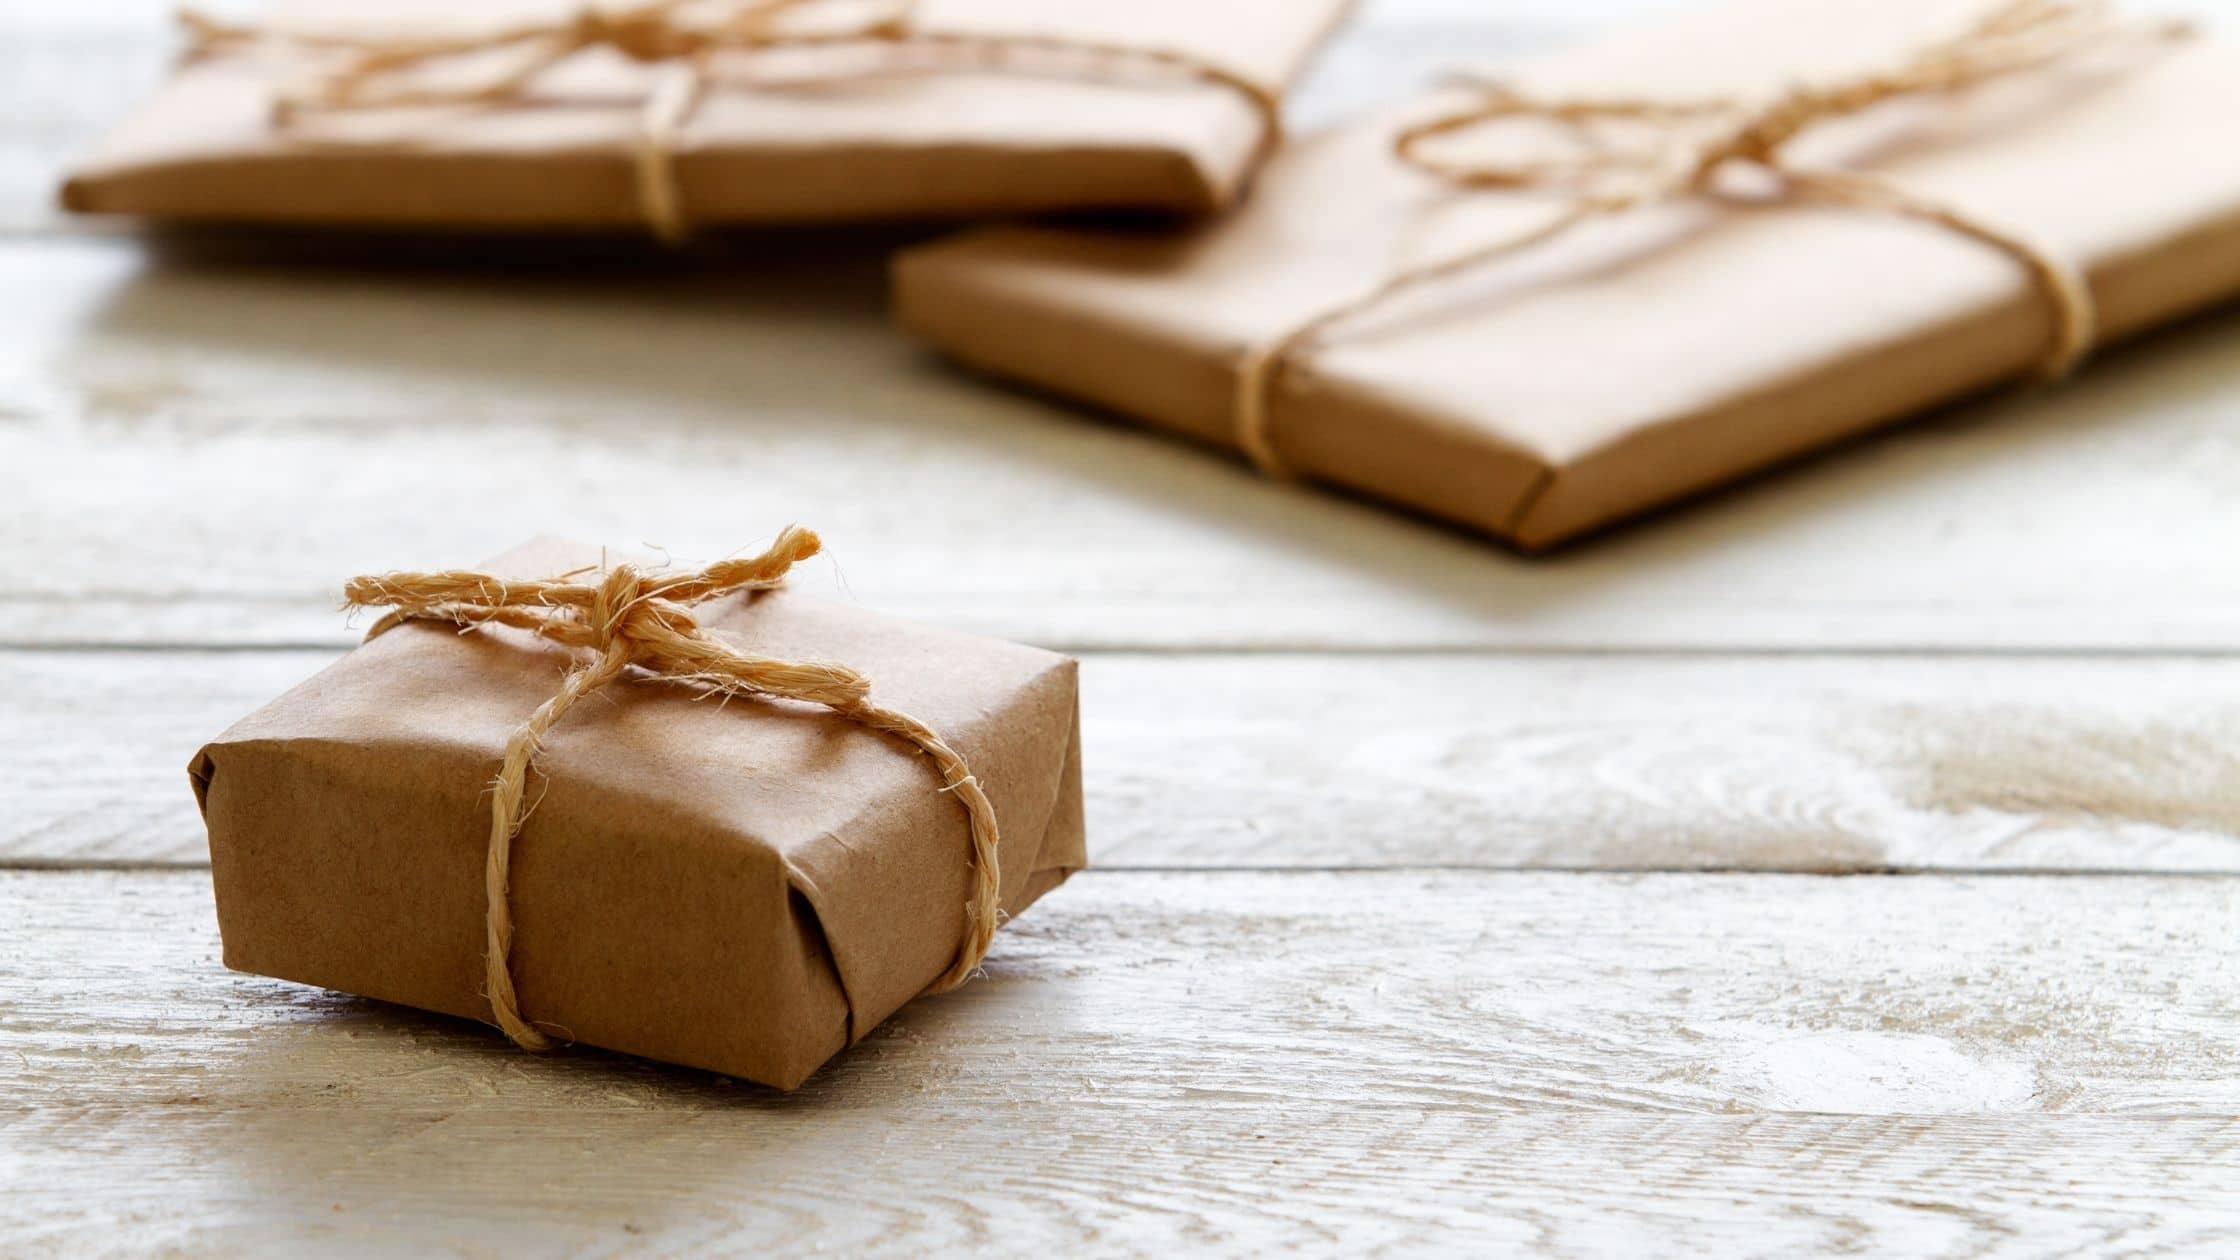 Give gifts the marketing way